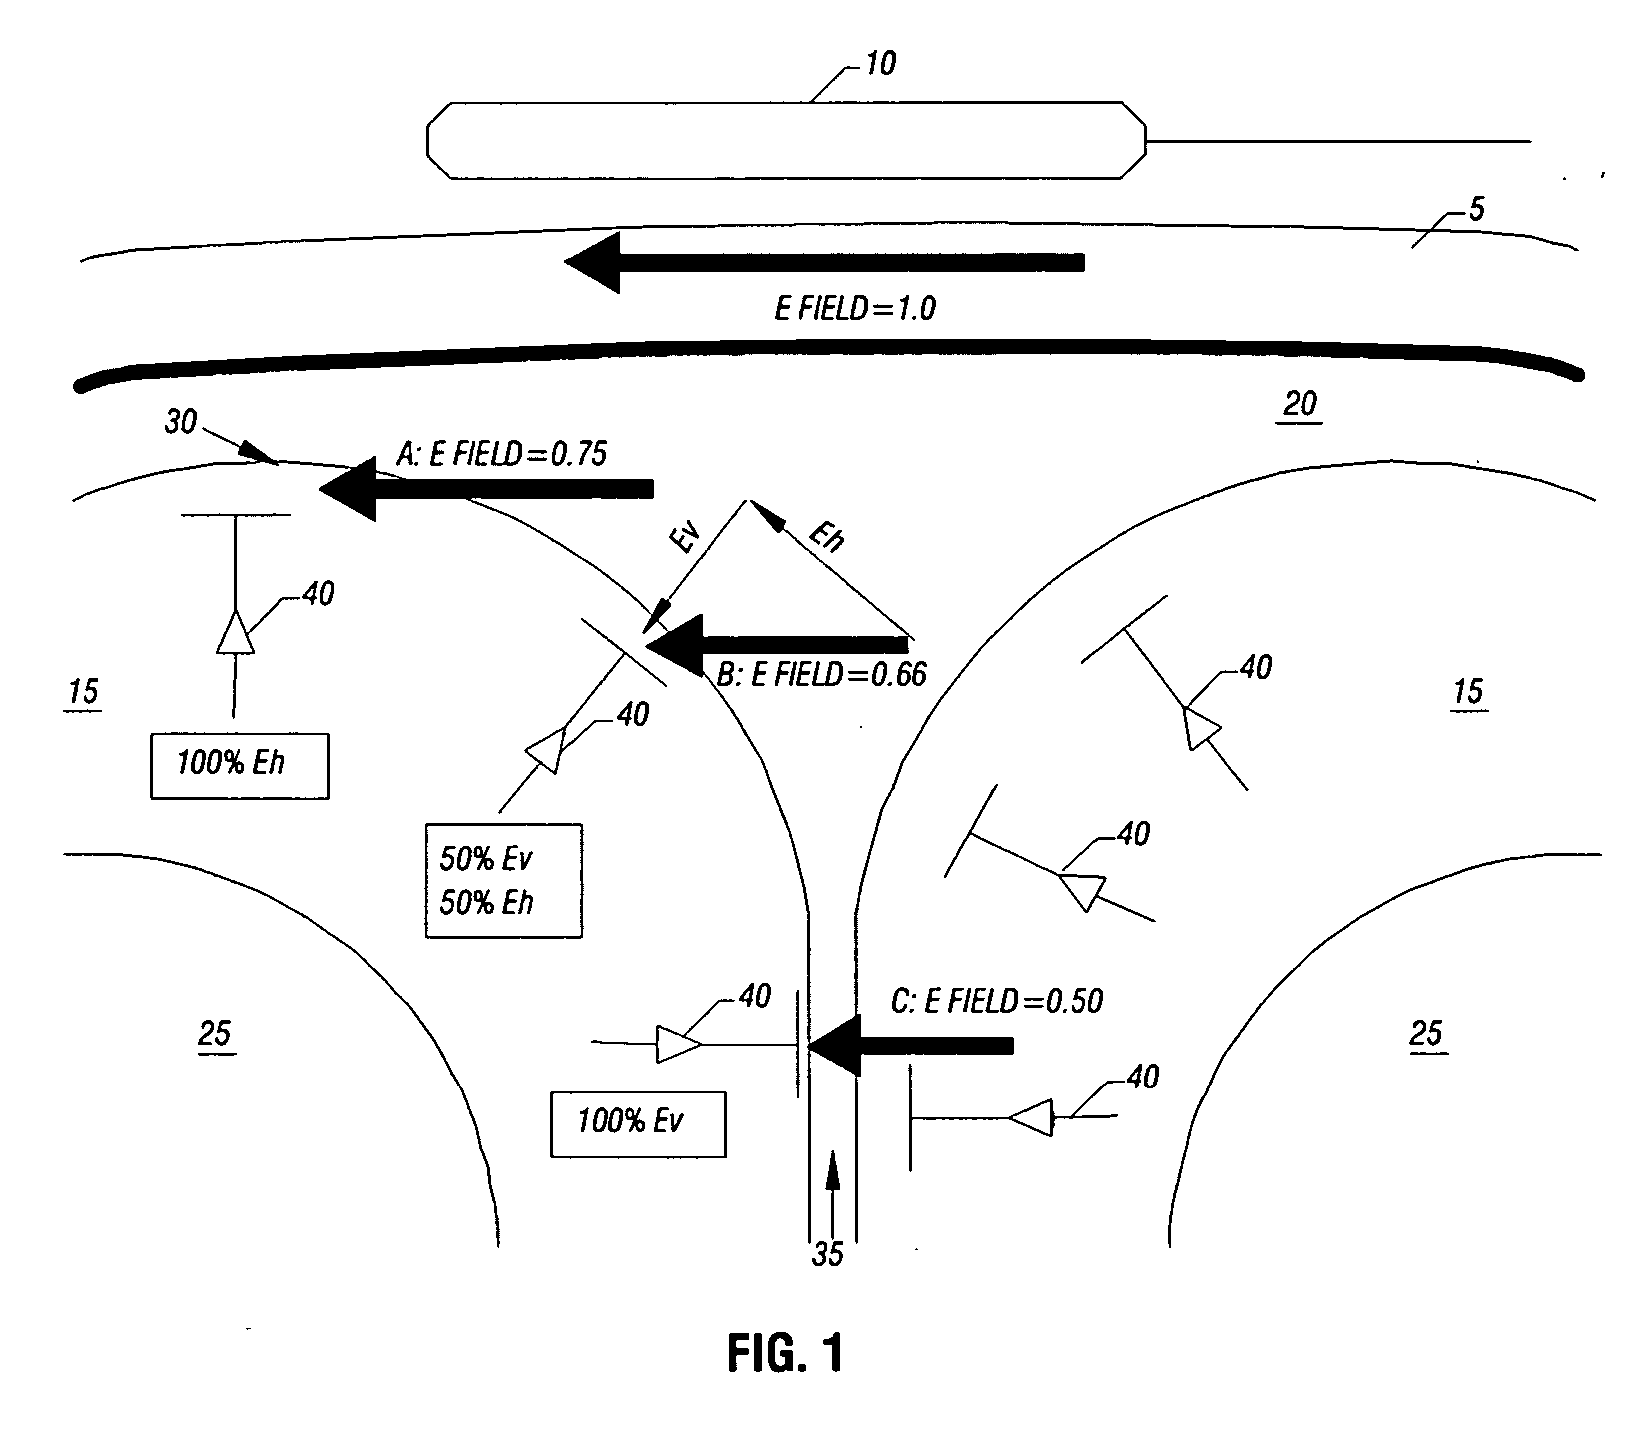 Apparatus and methods for delivery of transcranial magnetic stimulation